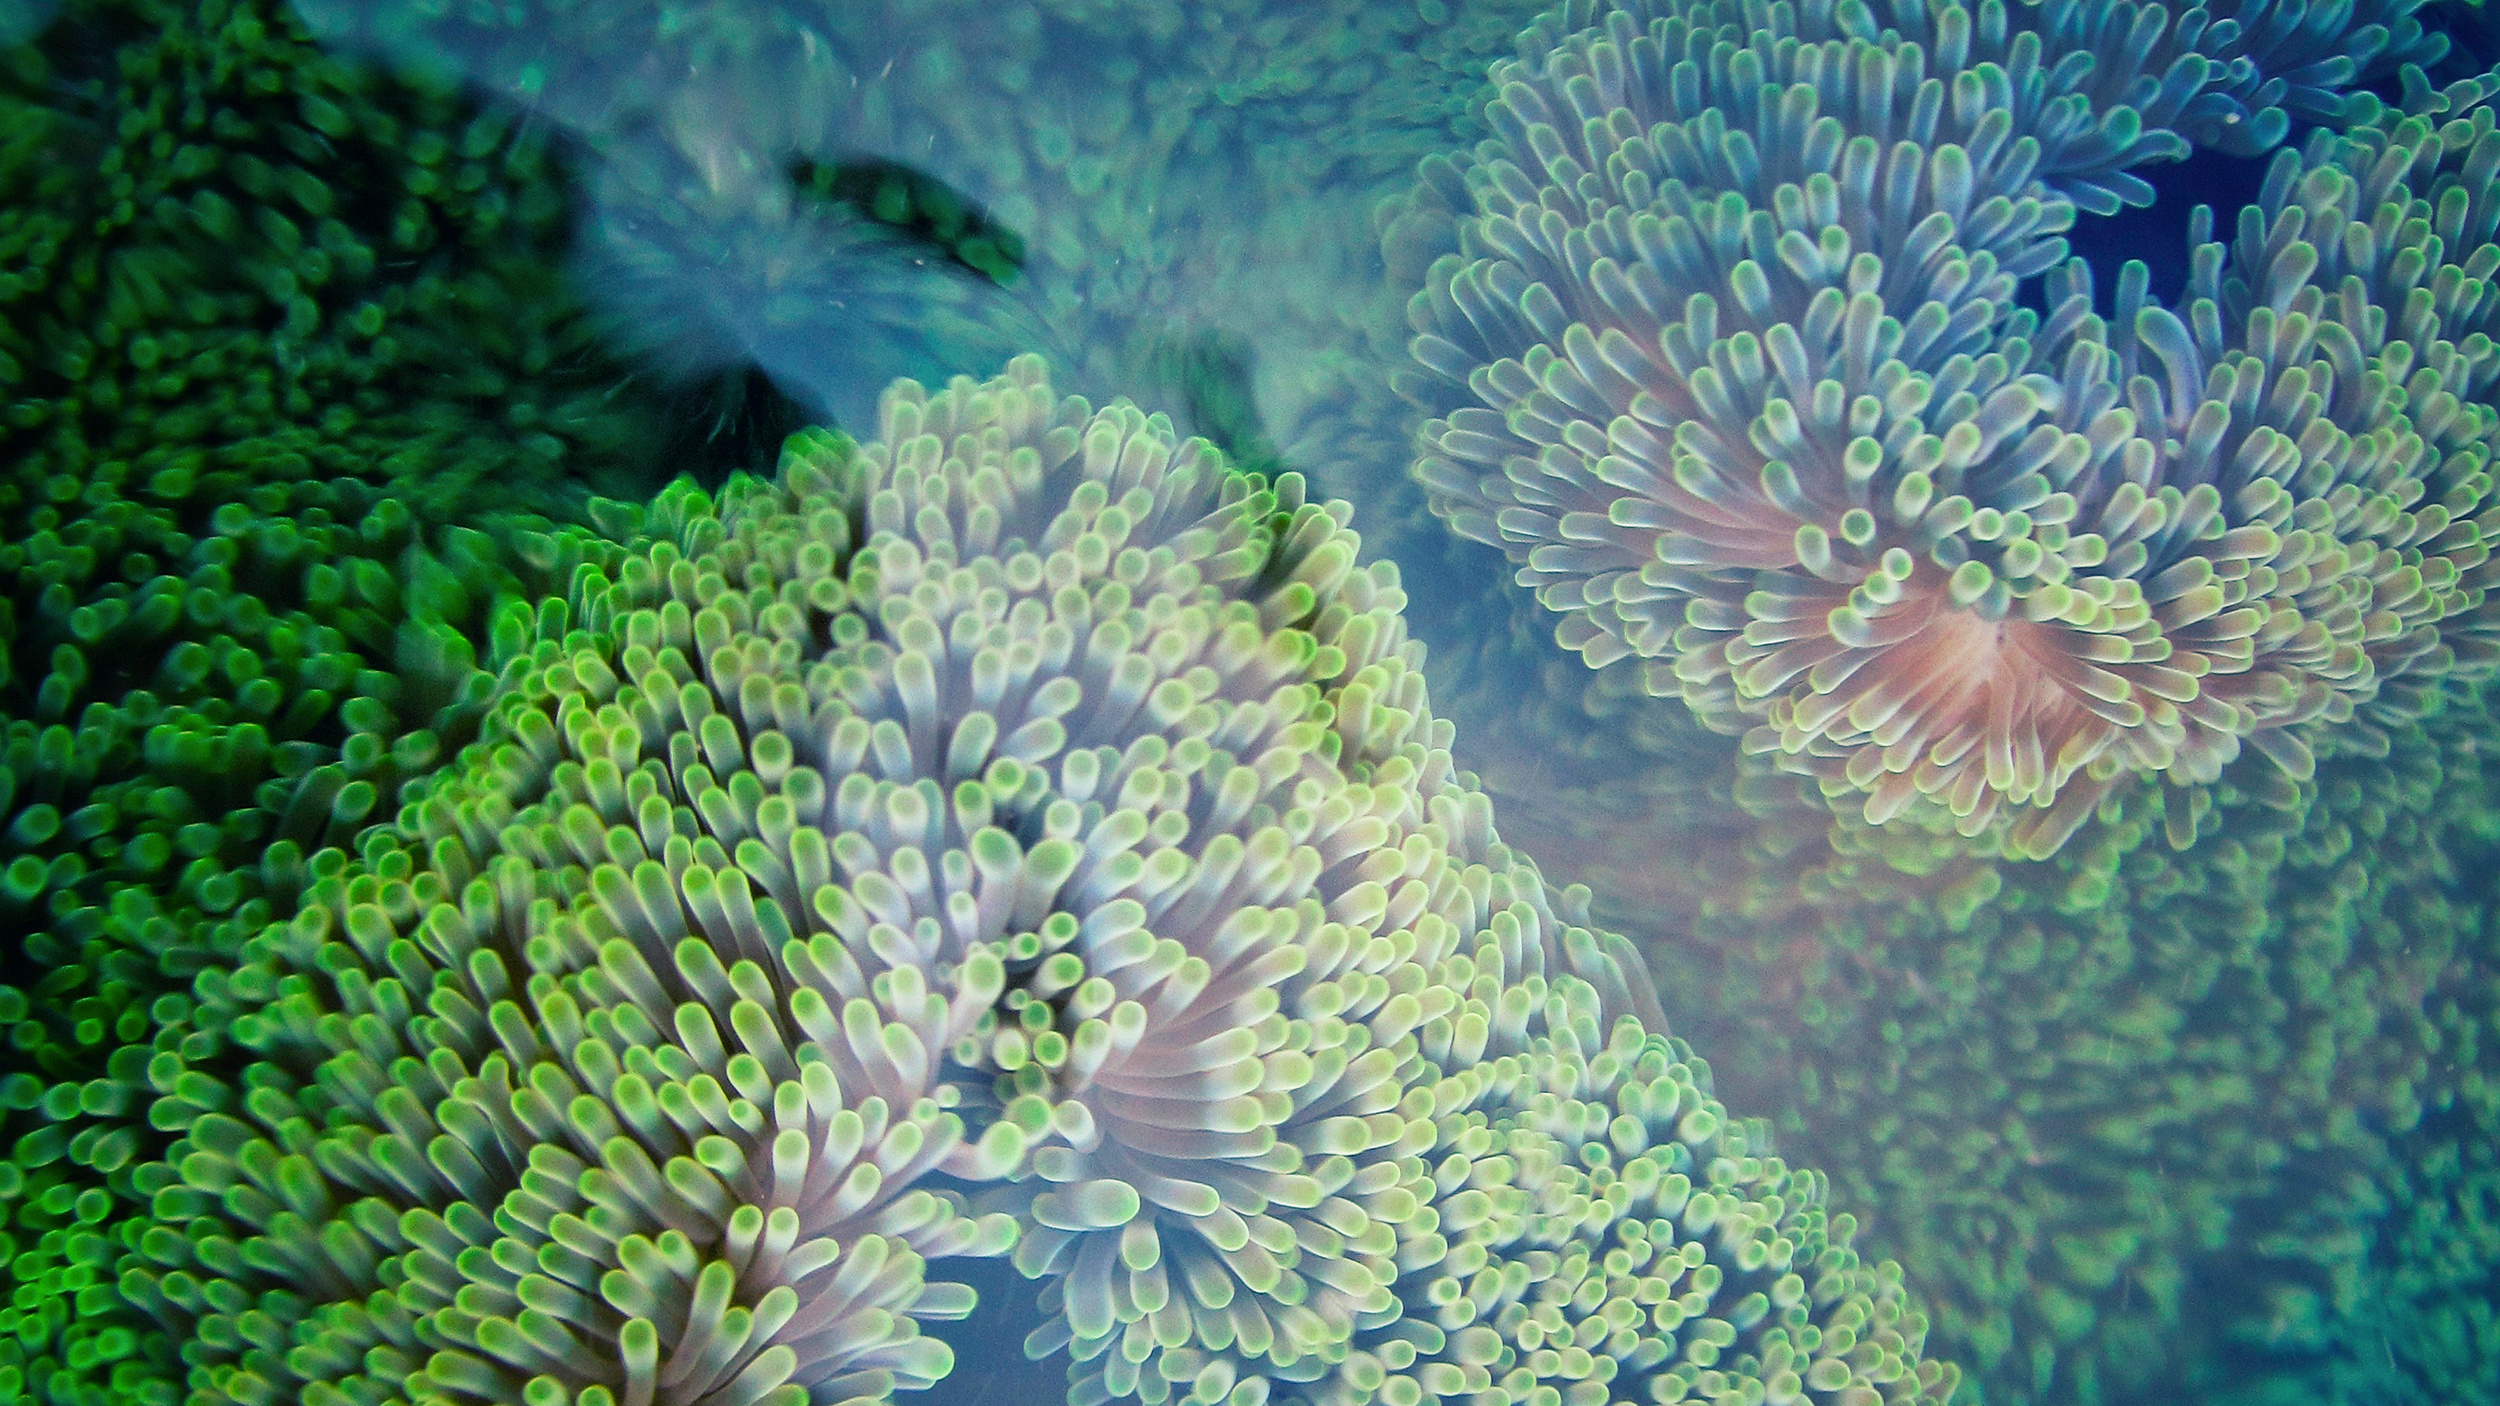 Scientist's accidental discovery makes coral grow 40x faster - Big Think